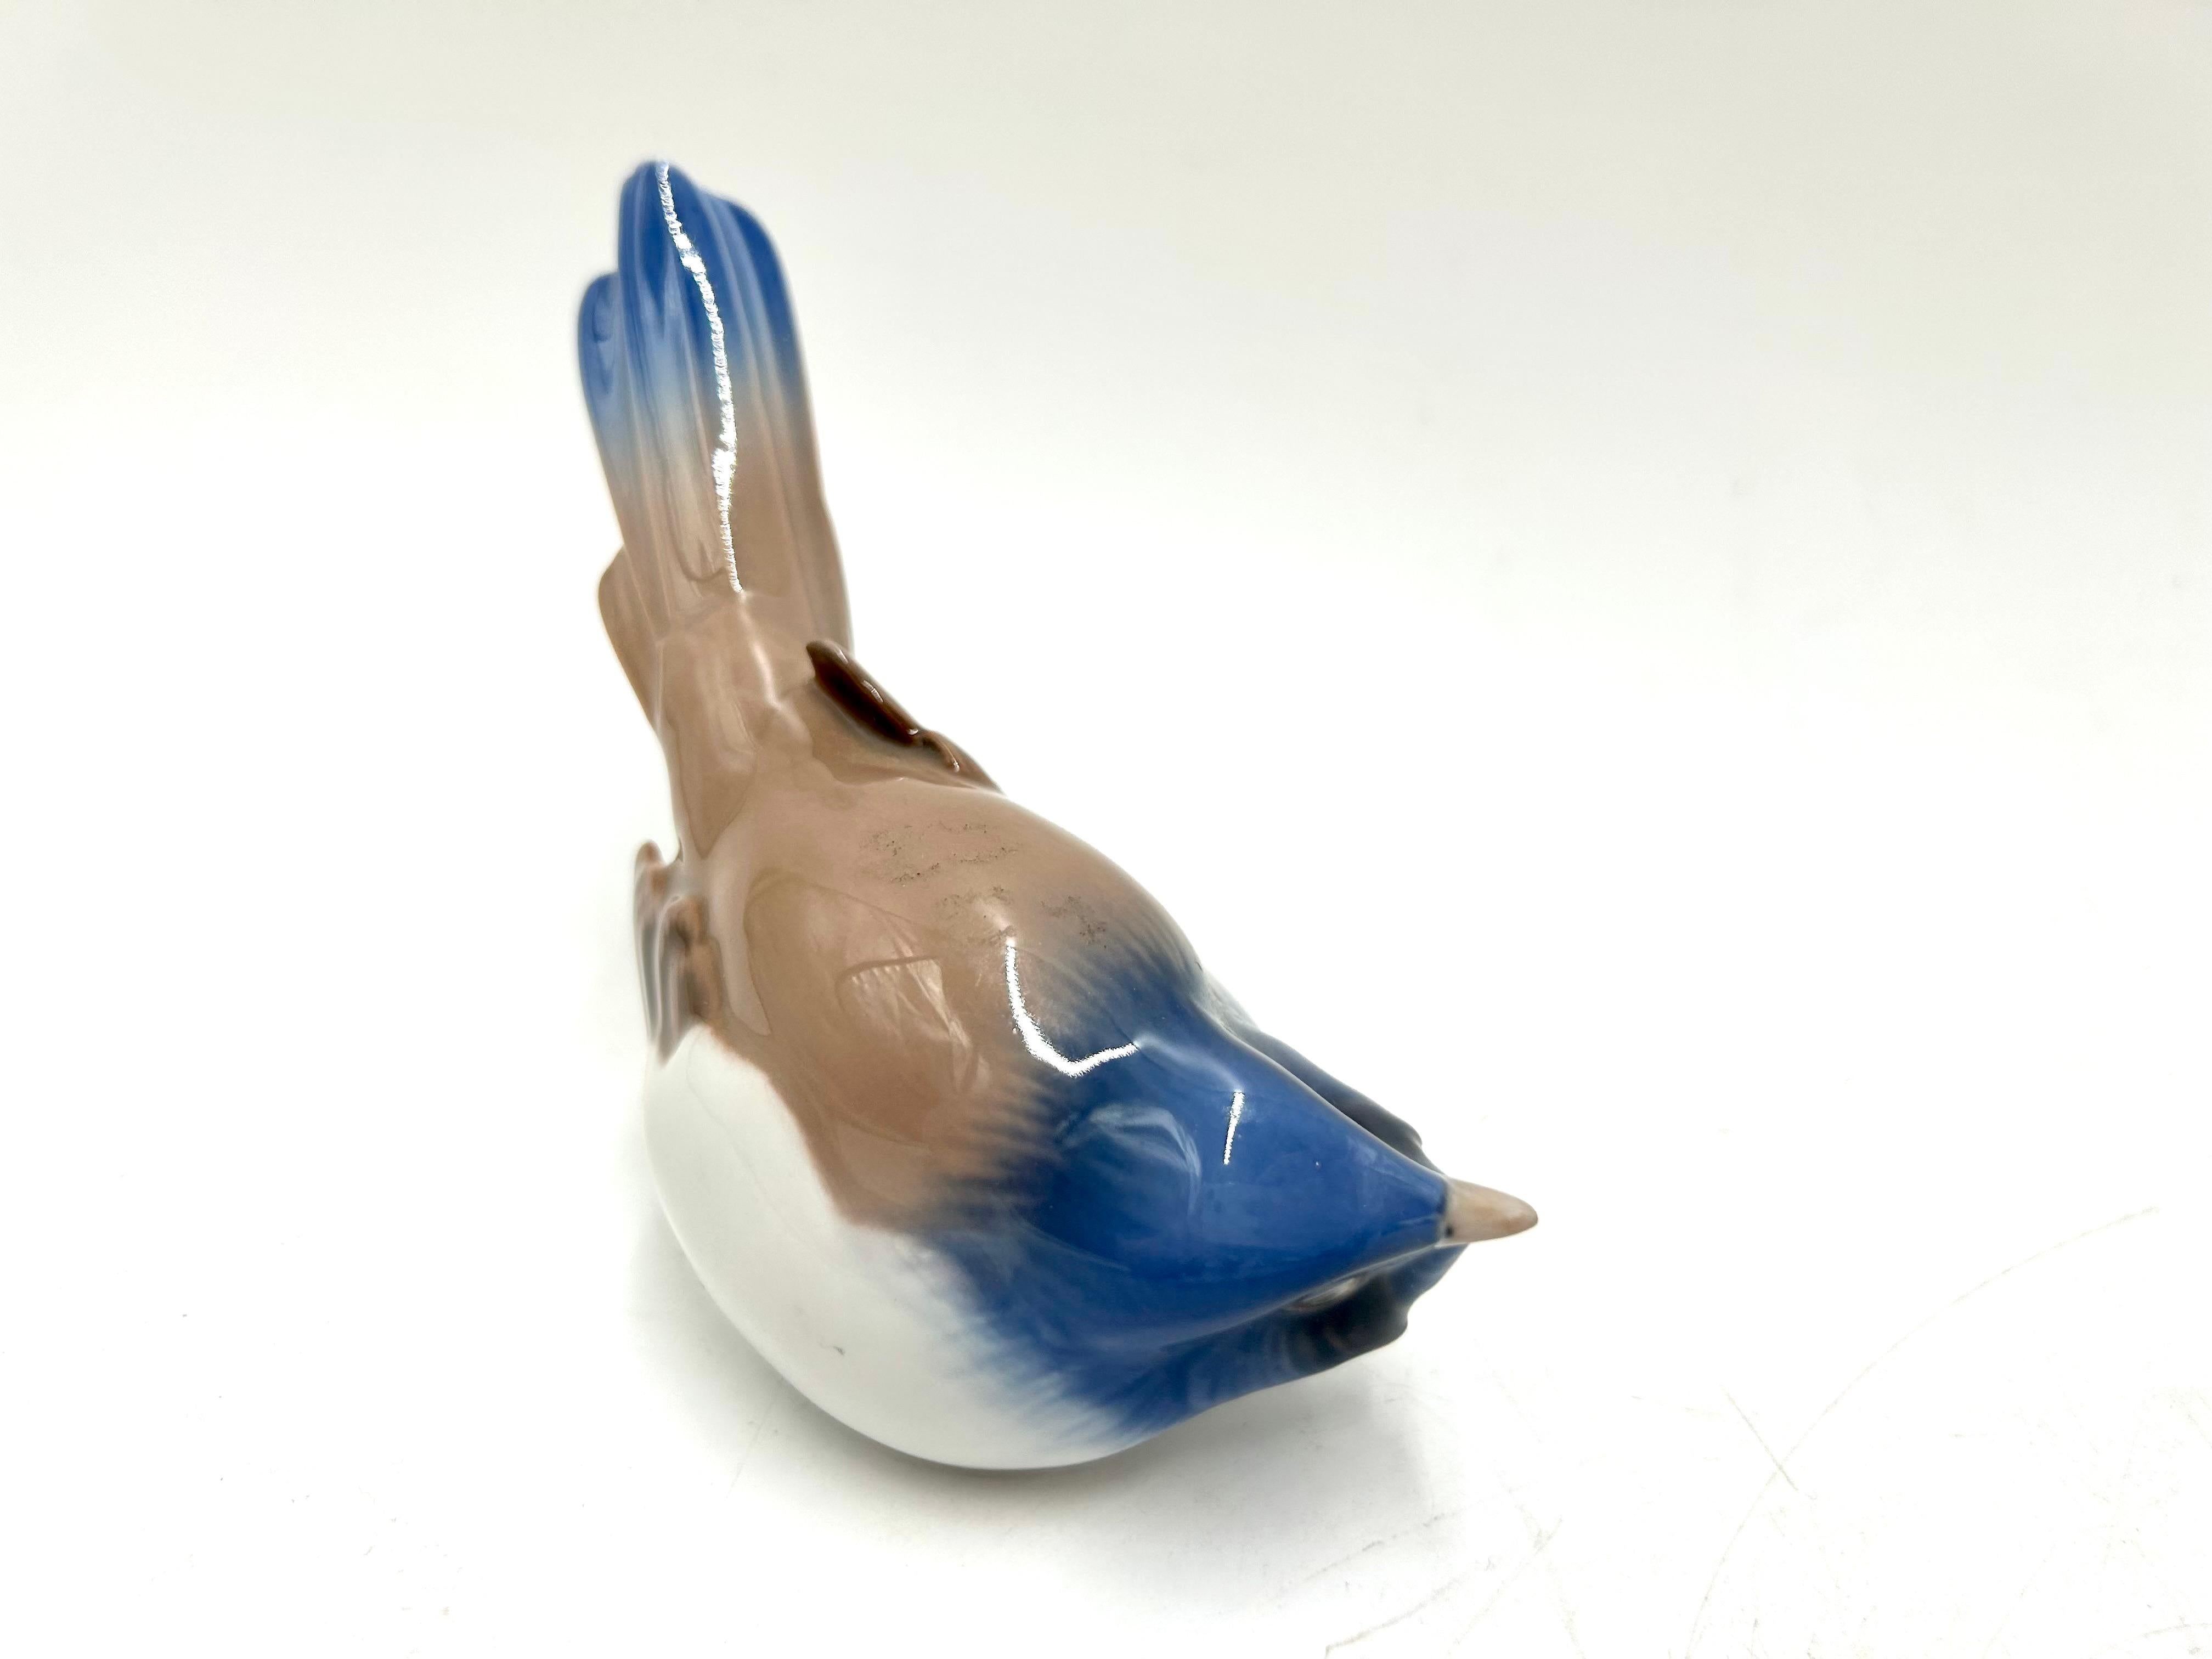 Porcelain bird figurine. Produced in Denmark by Bing & Grondahl in about 1948-1952.

Very good condition, no damage.

Measures: height 9 cm, width 12 cm, depth 9.5 cm